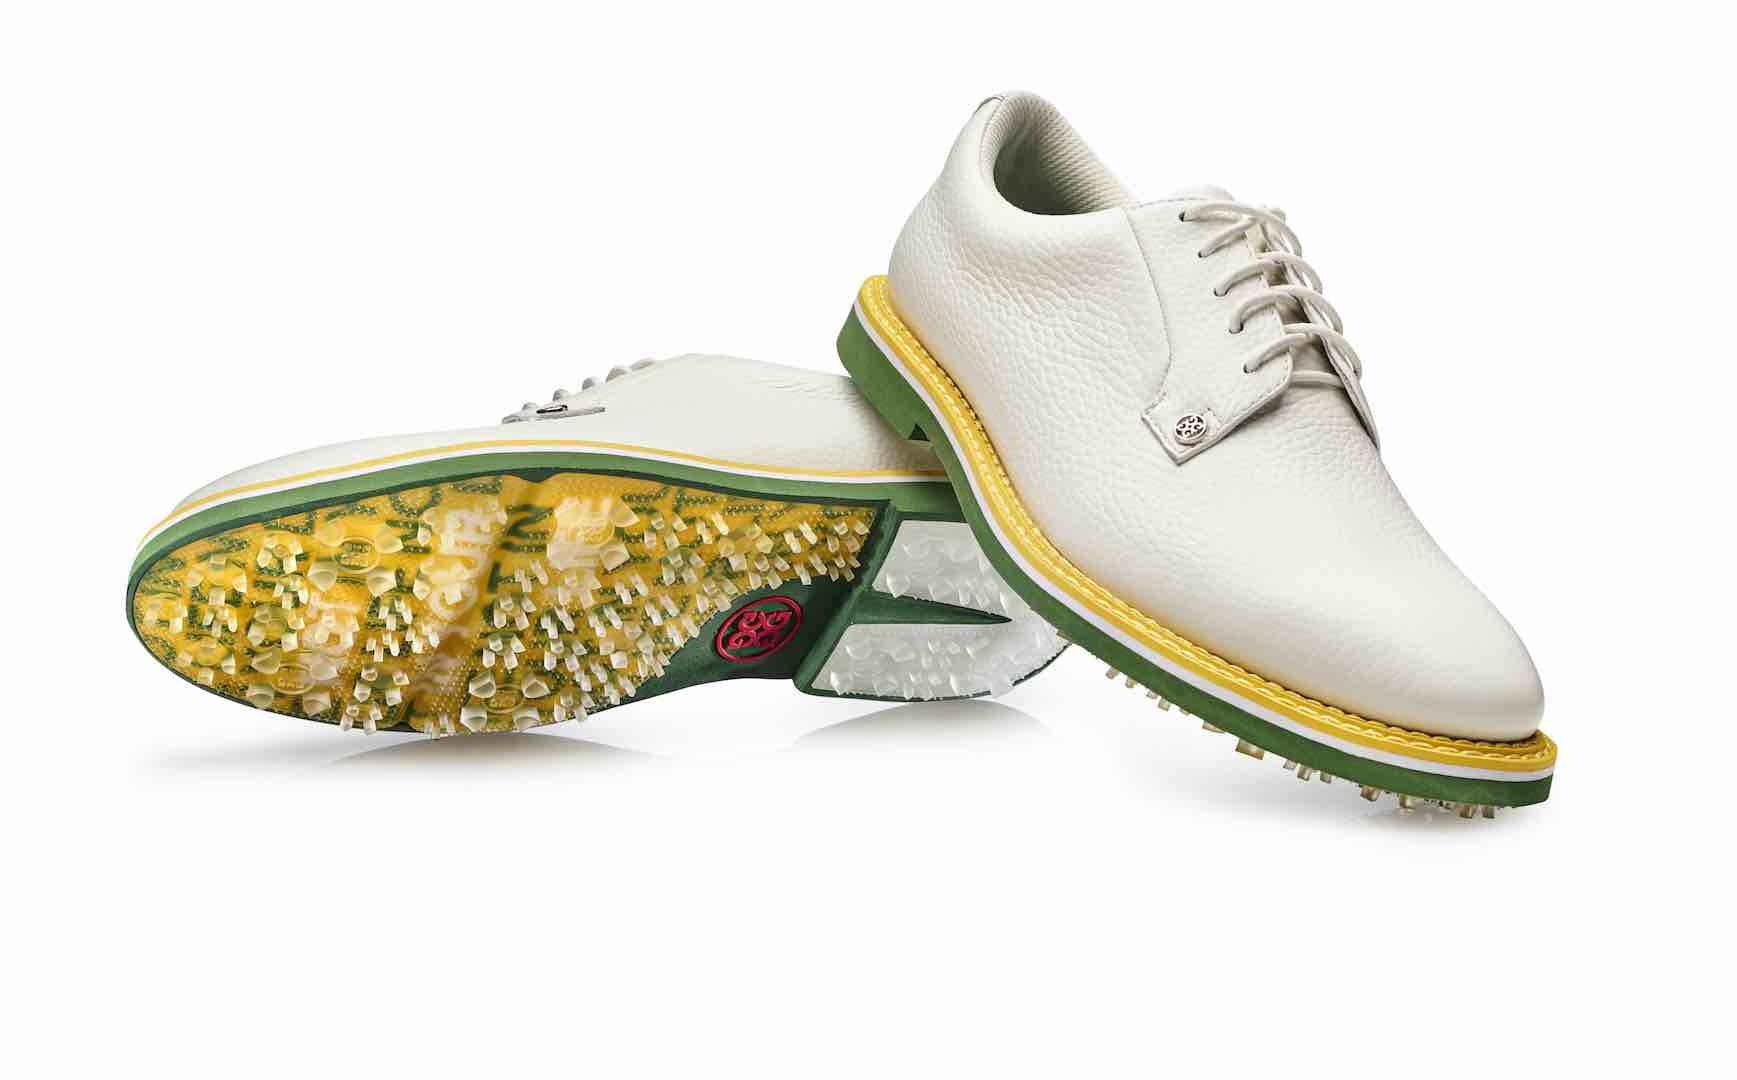 It's shoe time for Bubba Watson and G/Fore - GolfPunkHQ